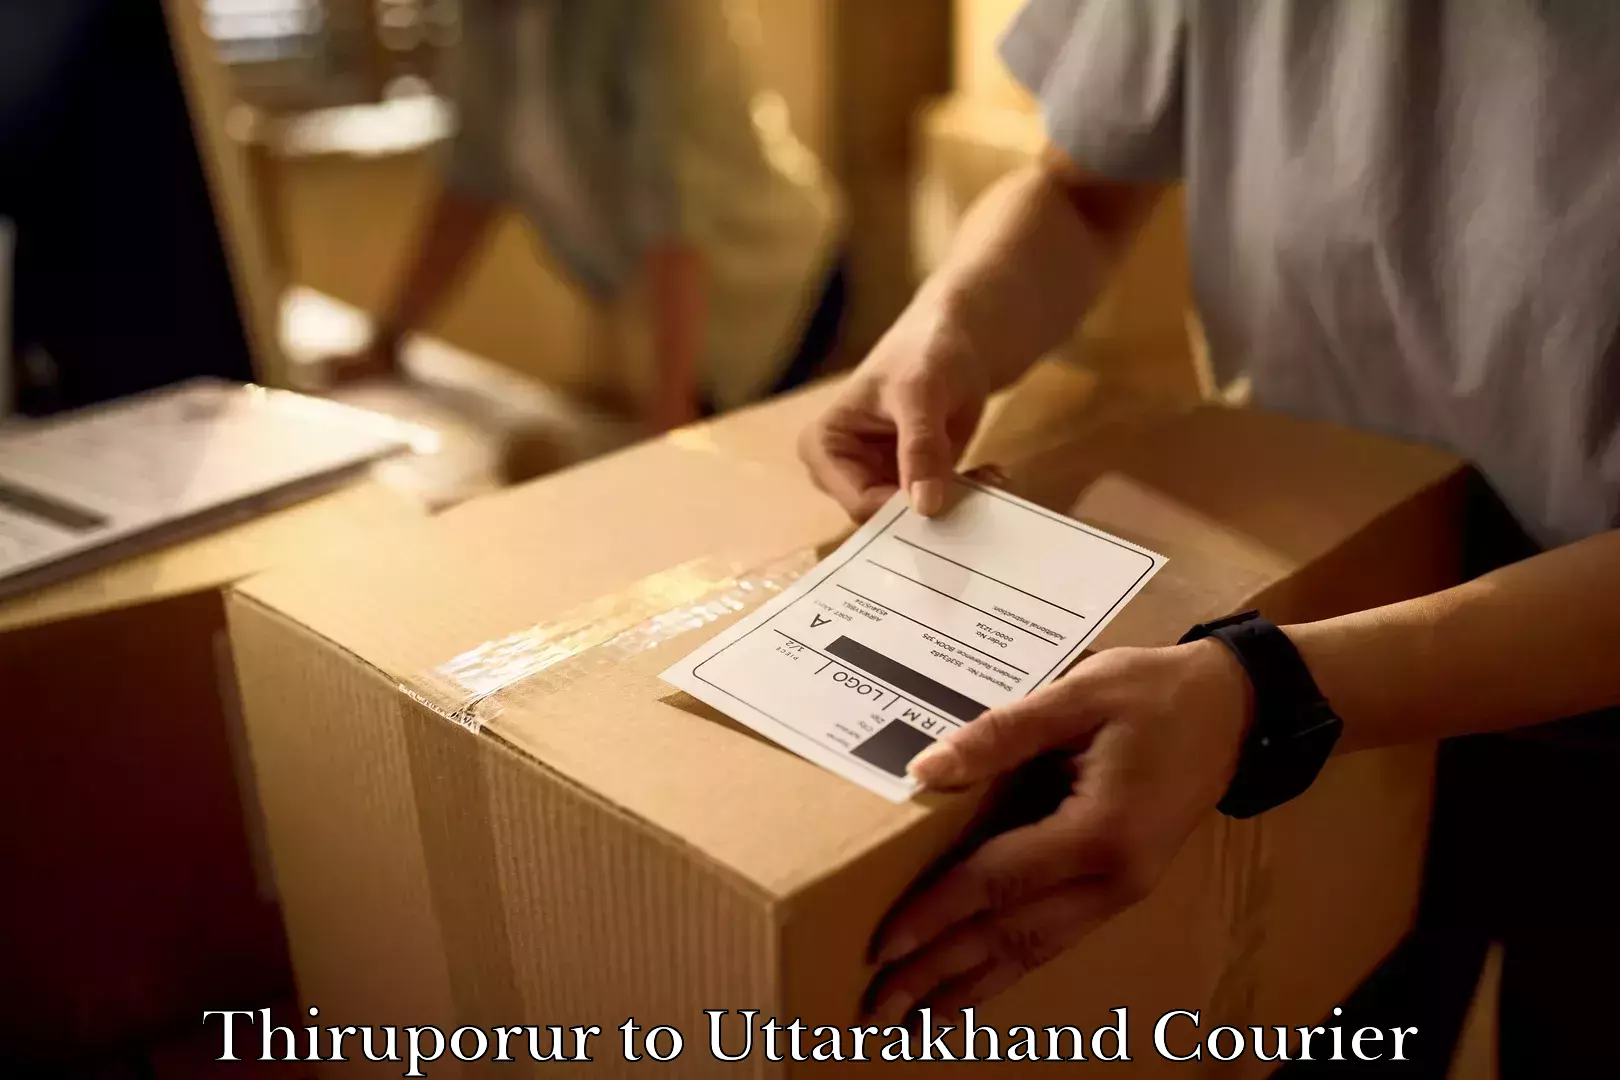 Furniture delivery service Thiruporur to Roorkee